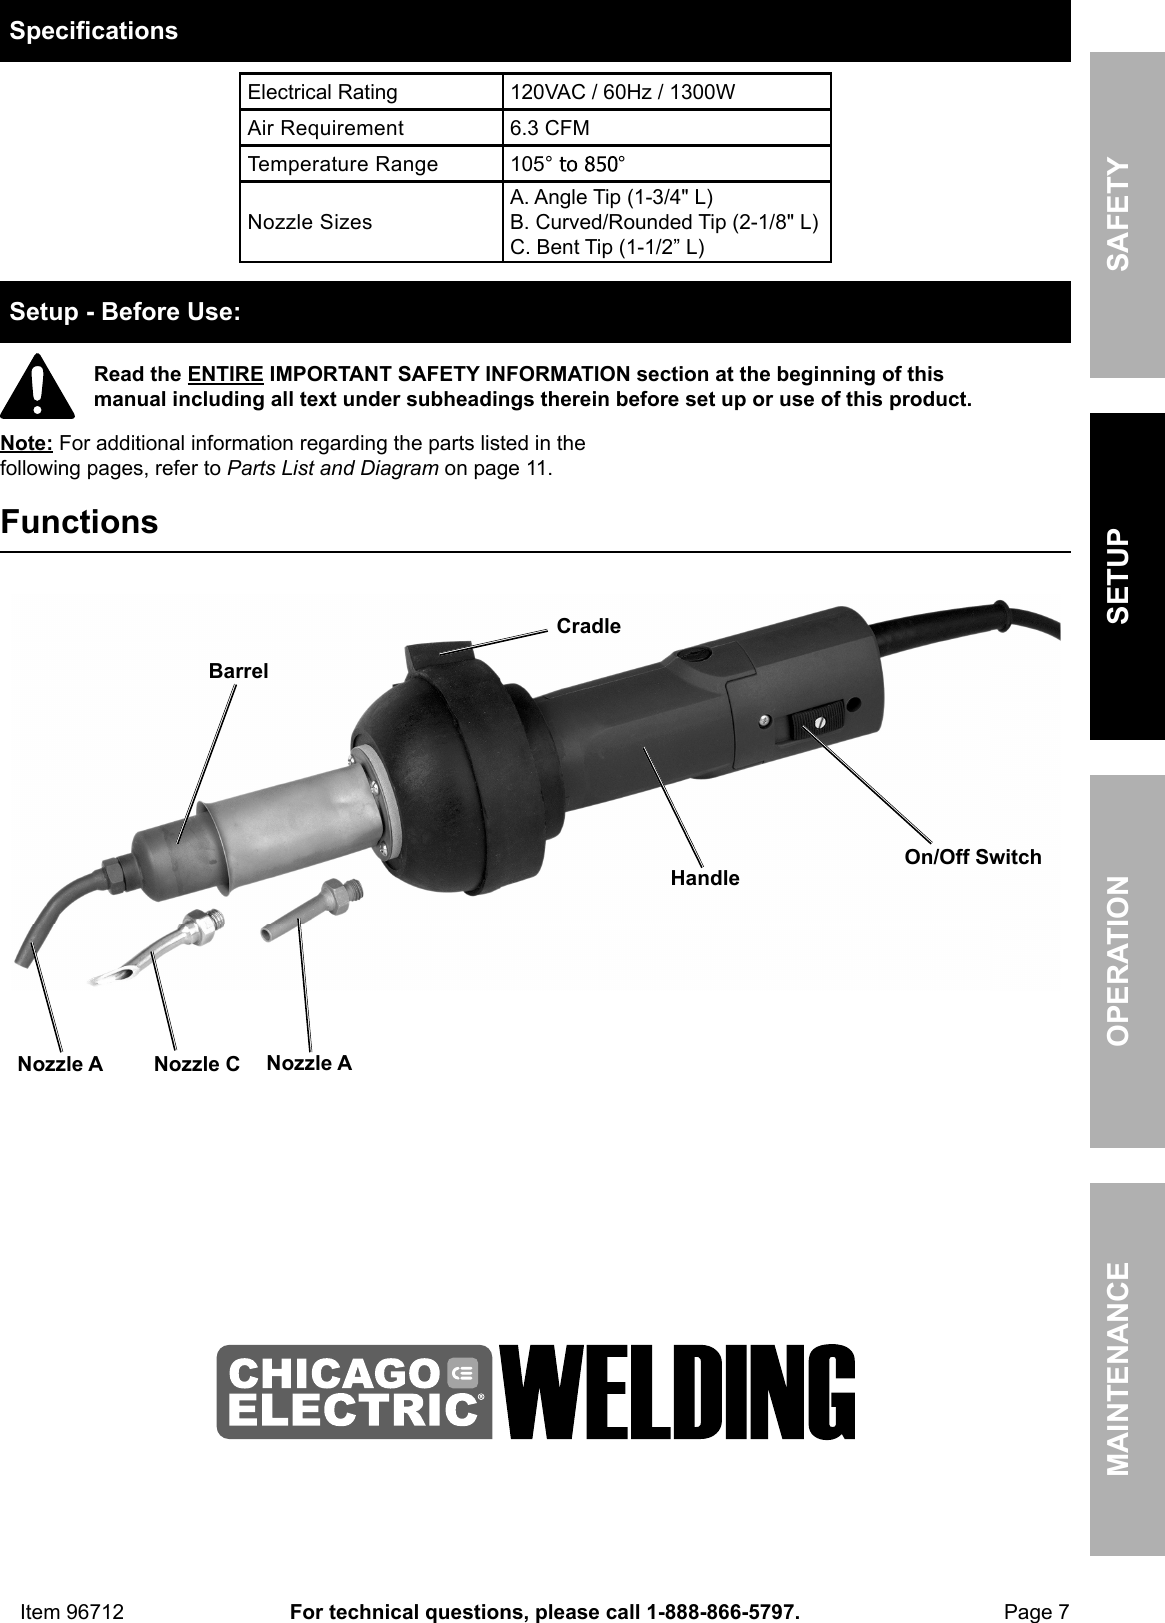 Page 7 of 12 - Harbor-Freight Harbor-Freight-1300-Watt-Plastic-Welding-Kit-With-Air-Motor-And-Temperature-Adjustment-Product-Manual-  Harbor-freight-1300-watt-plastic-welding-kit-with-air-motor-and-temperature-adjustment-product-manual